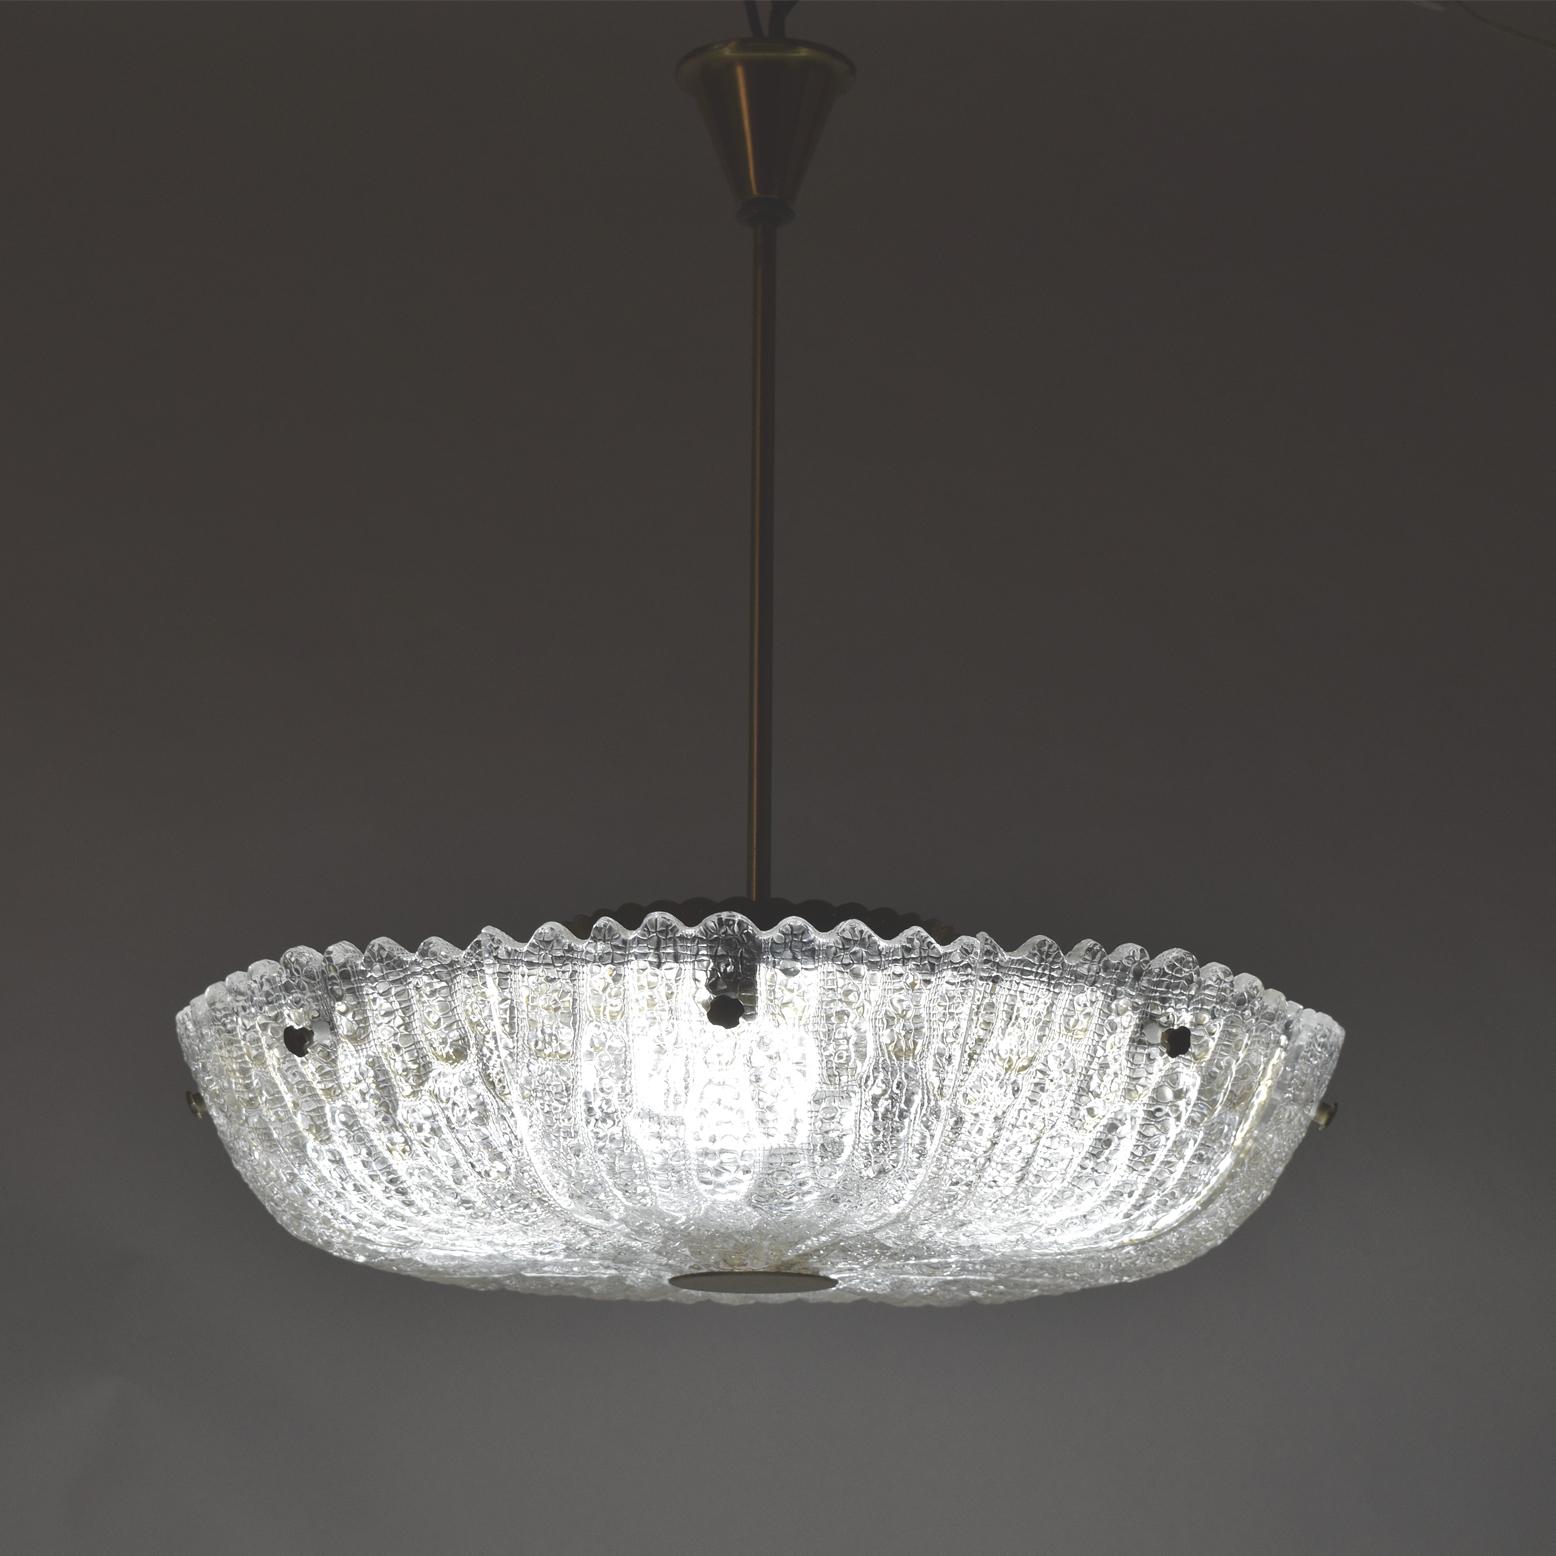 Mold-blown glass Orrefors ceiling lamp, with brass diffuser, rod and decorative screws. Designed by Carl Fagerlund.